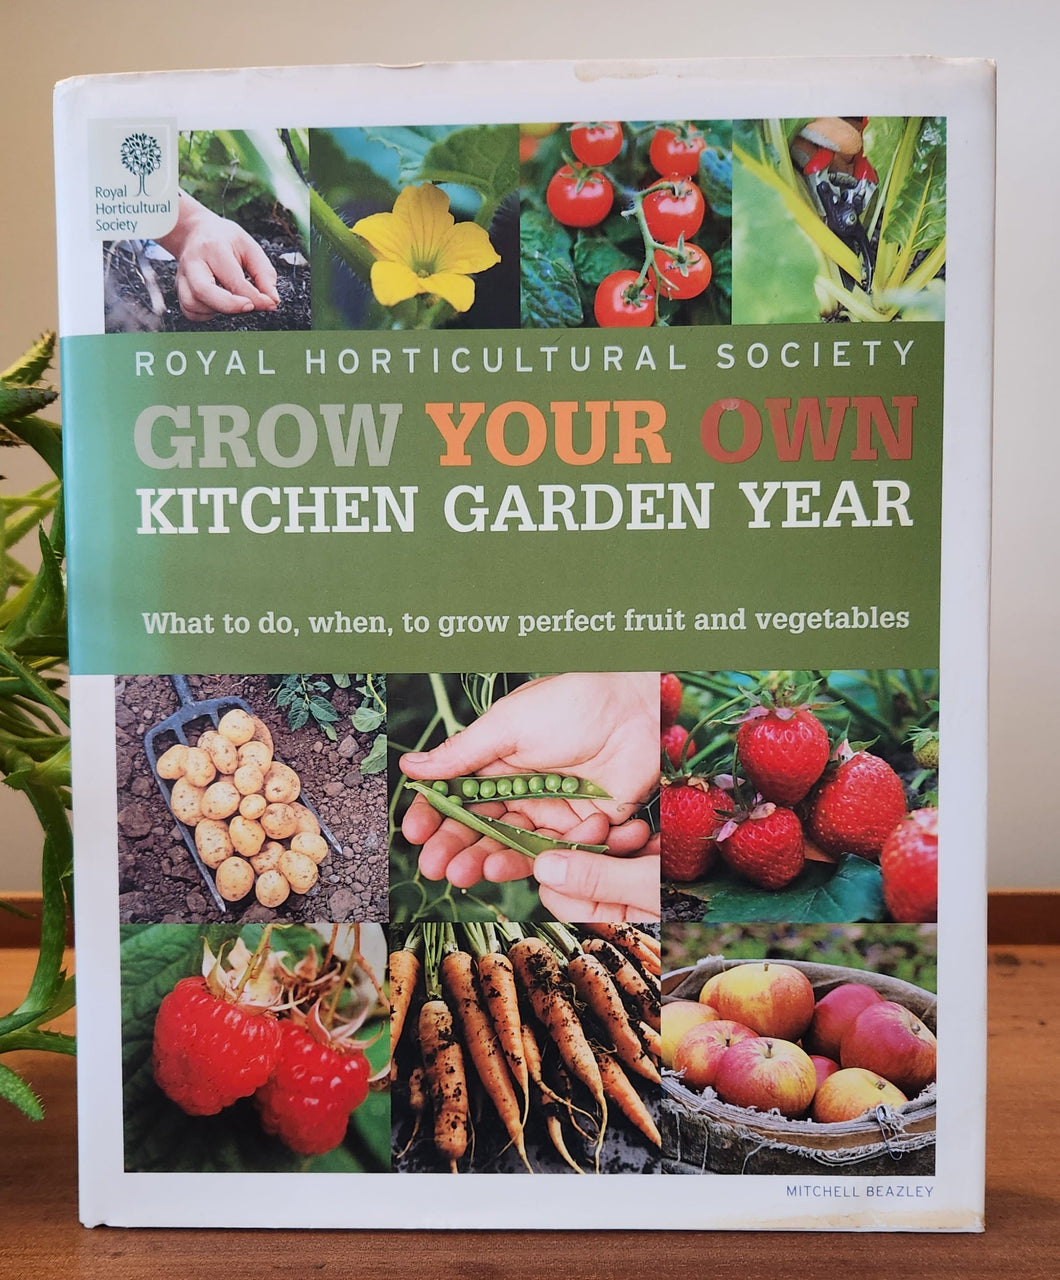 Royal Horticultural Society: Grow Your Own Kitchen Garden Year by Mitchell Beazley